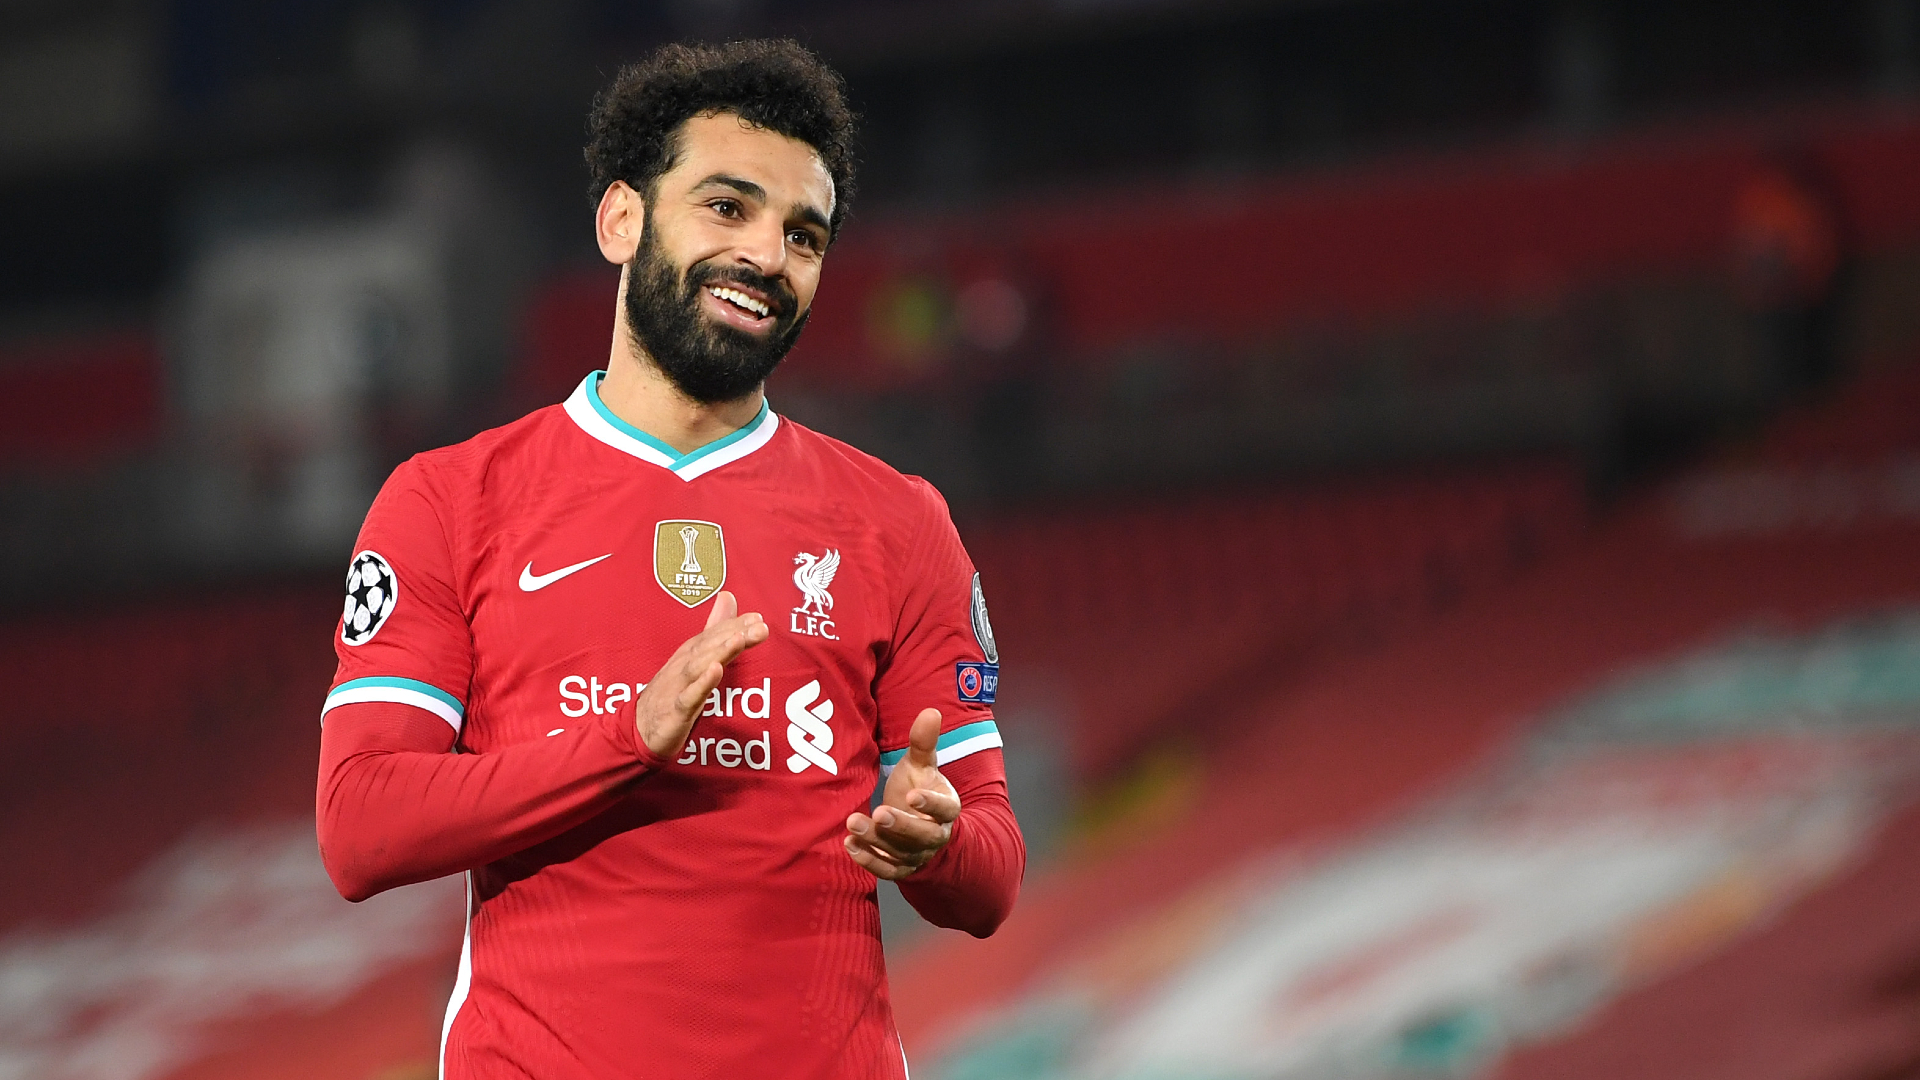 Video Mo Salah Liverpools Scoring King Your Best Source For